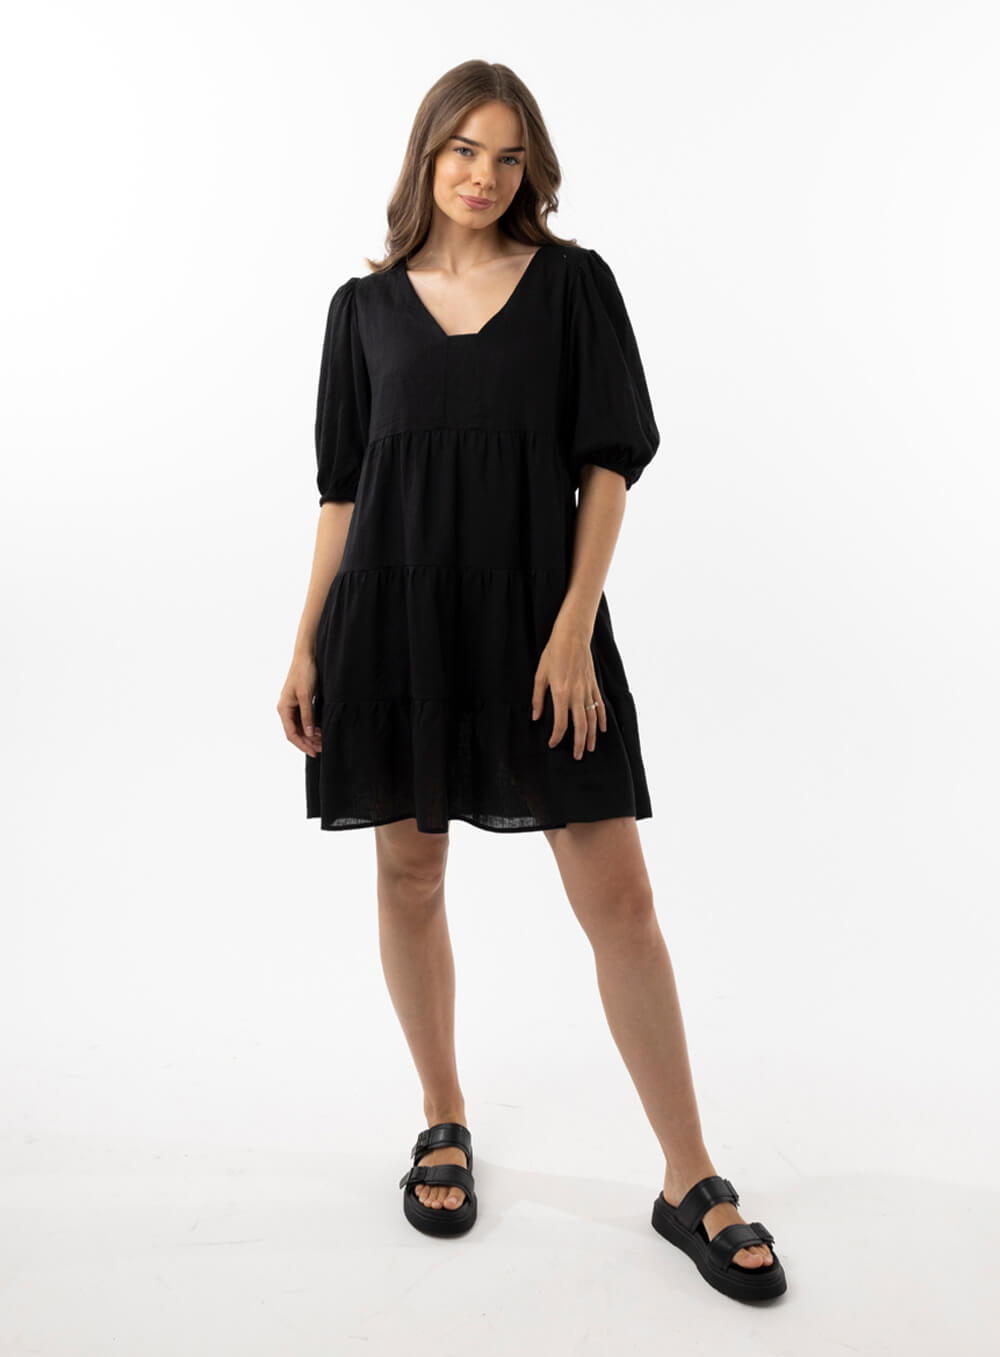 The Eleanor mini dress in black features a flowing layered a line shape with draping linen/viscose fabric, puff 3/4 sleeves with elastic cuff which can be pushed up to the elbow, a dropped v shape neckline with a square finish.